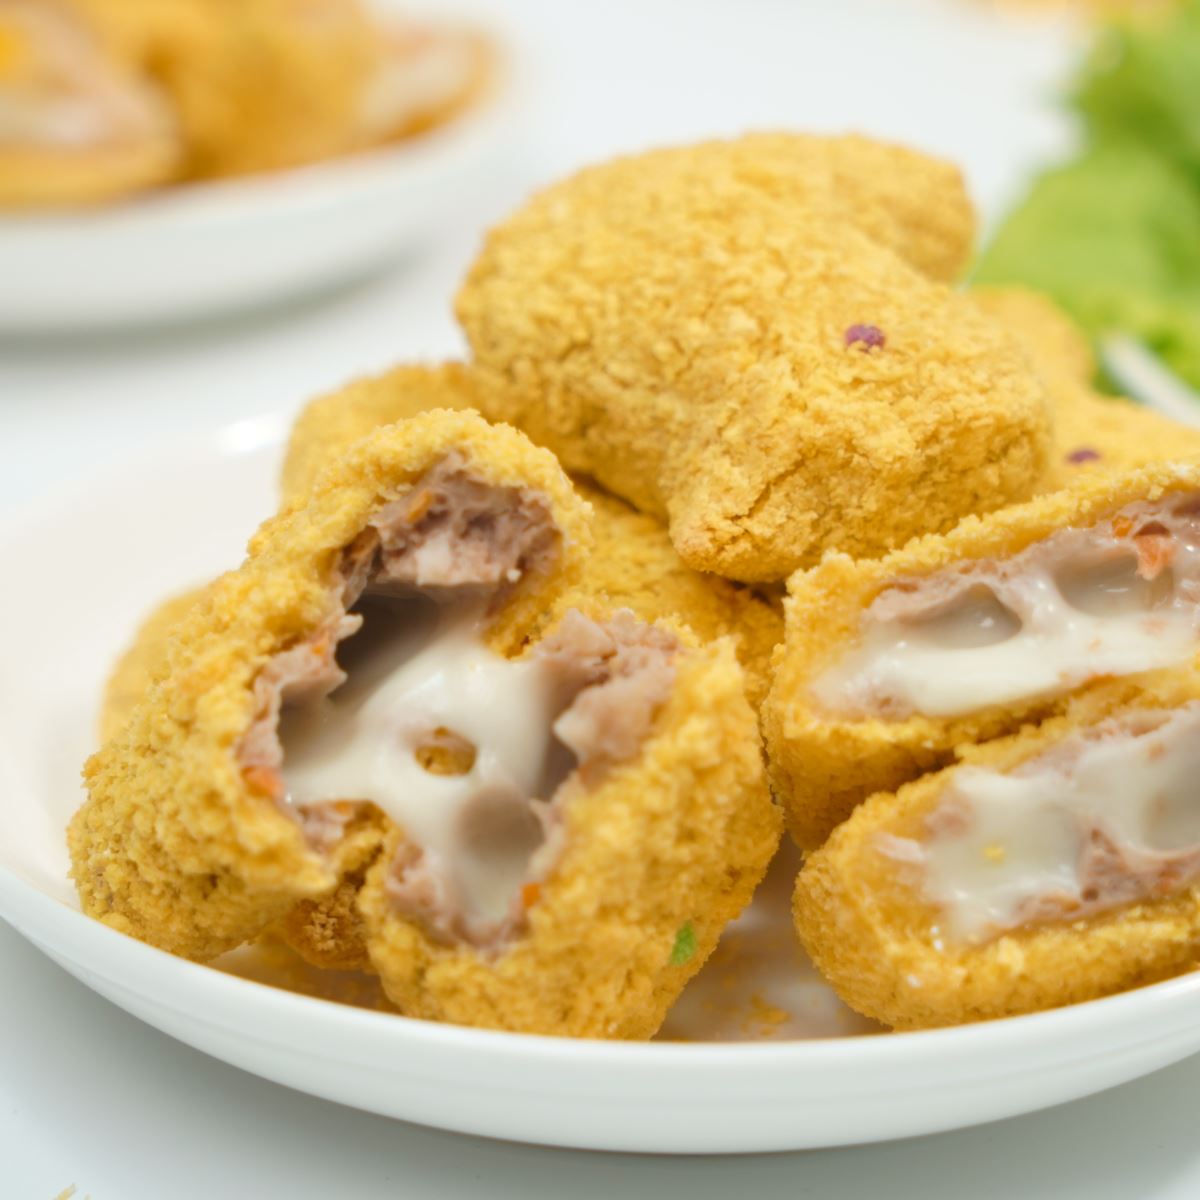 What`s new in Chicken Cake that attracts young people?